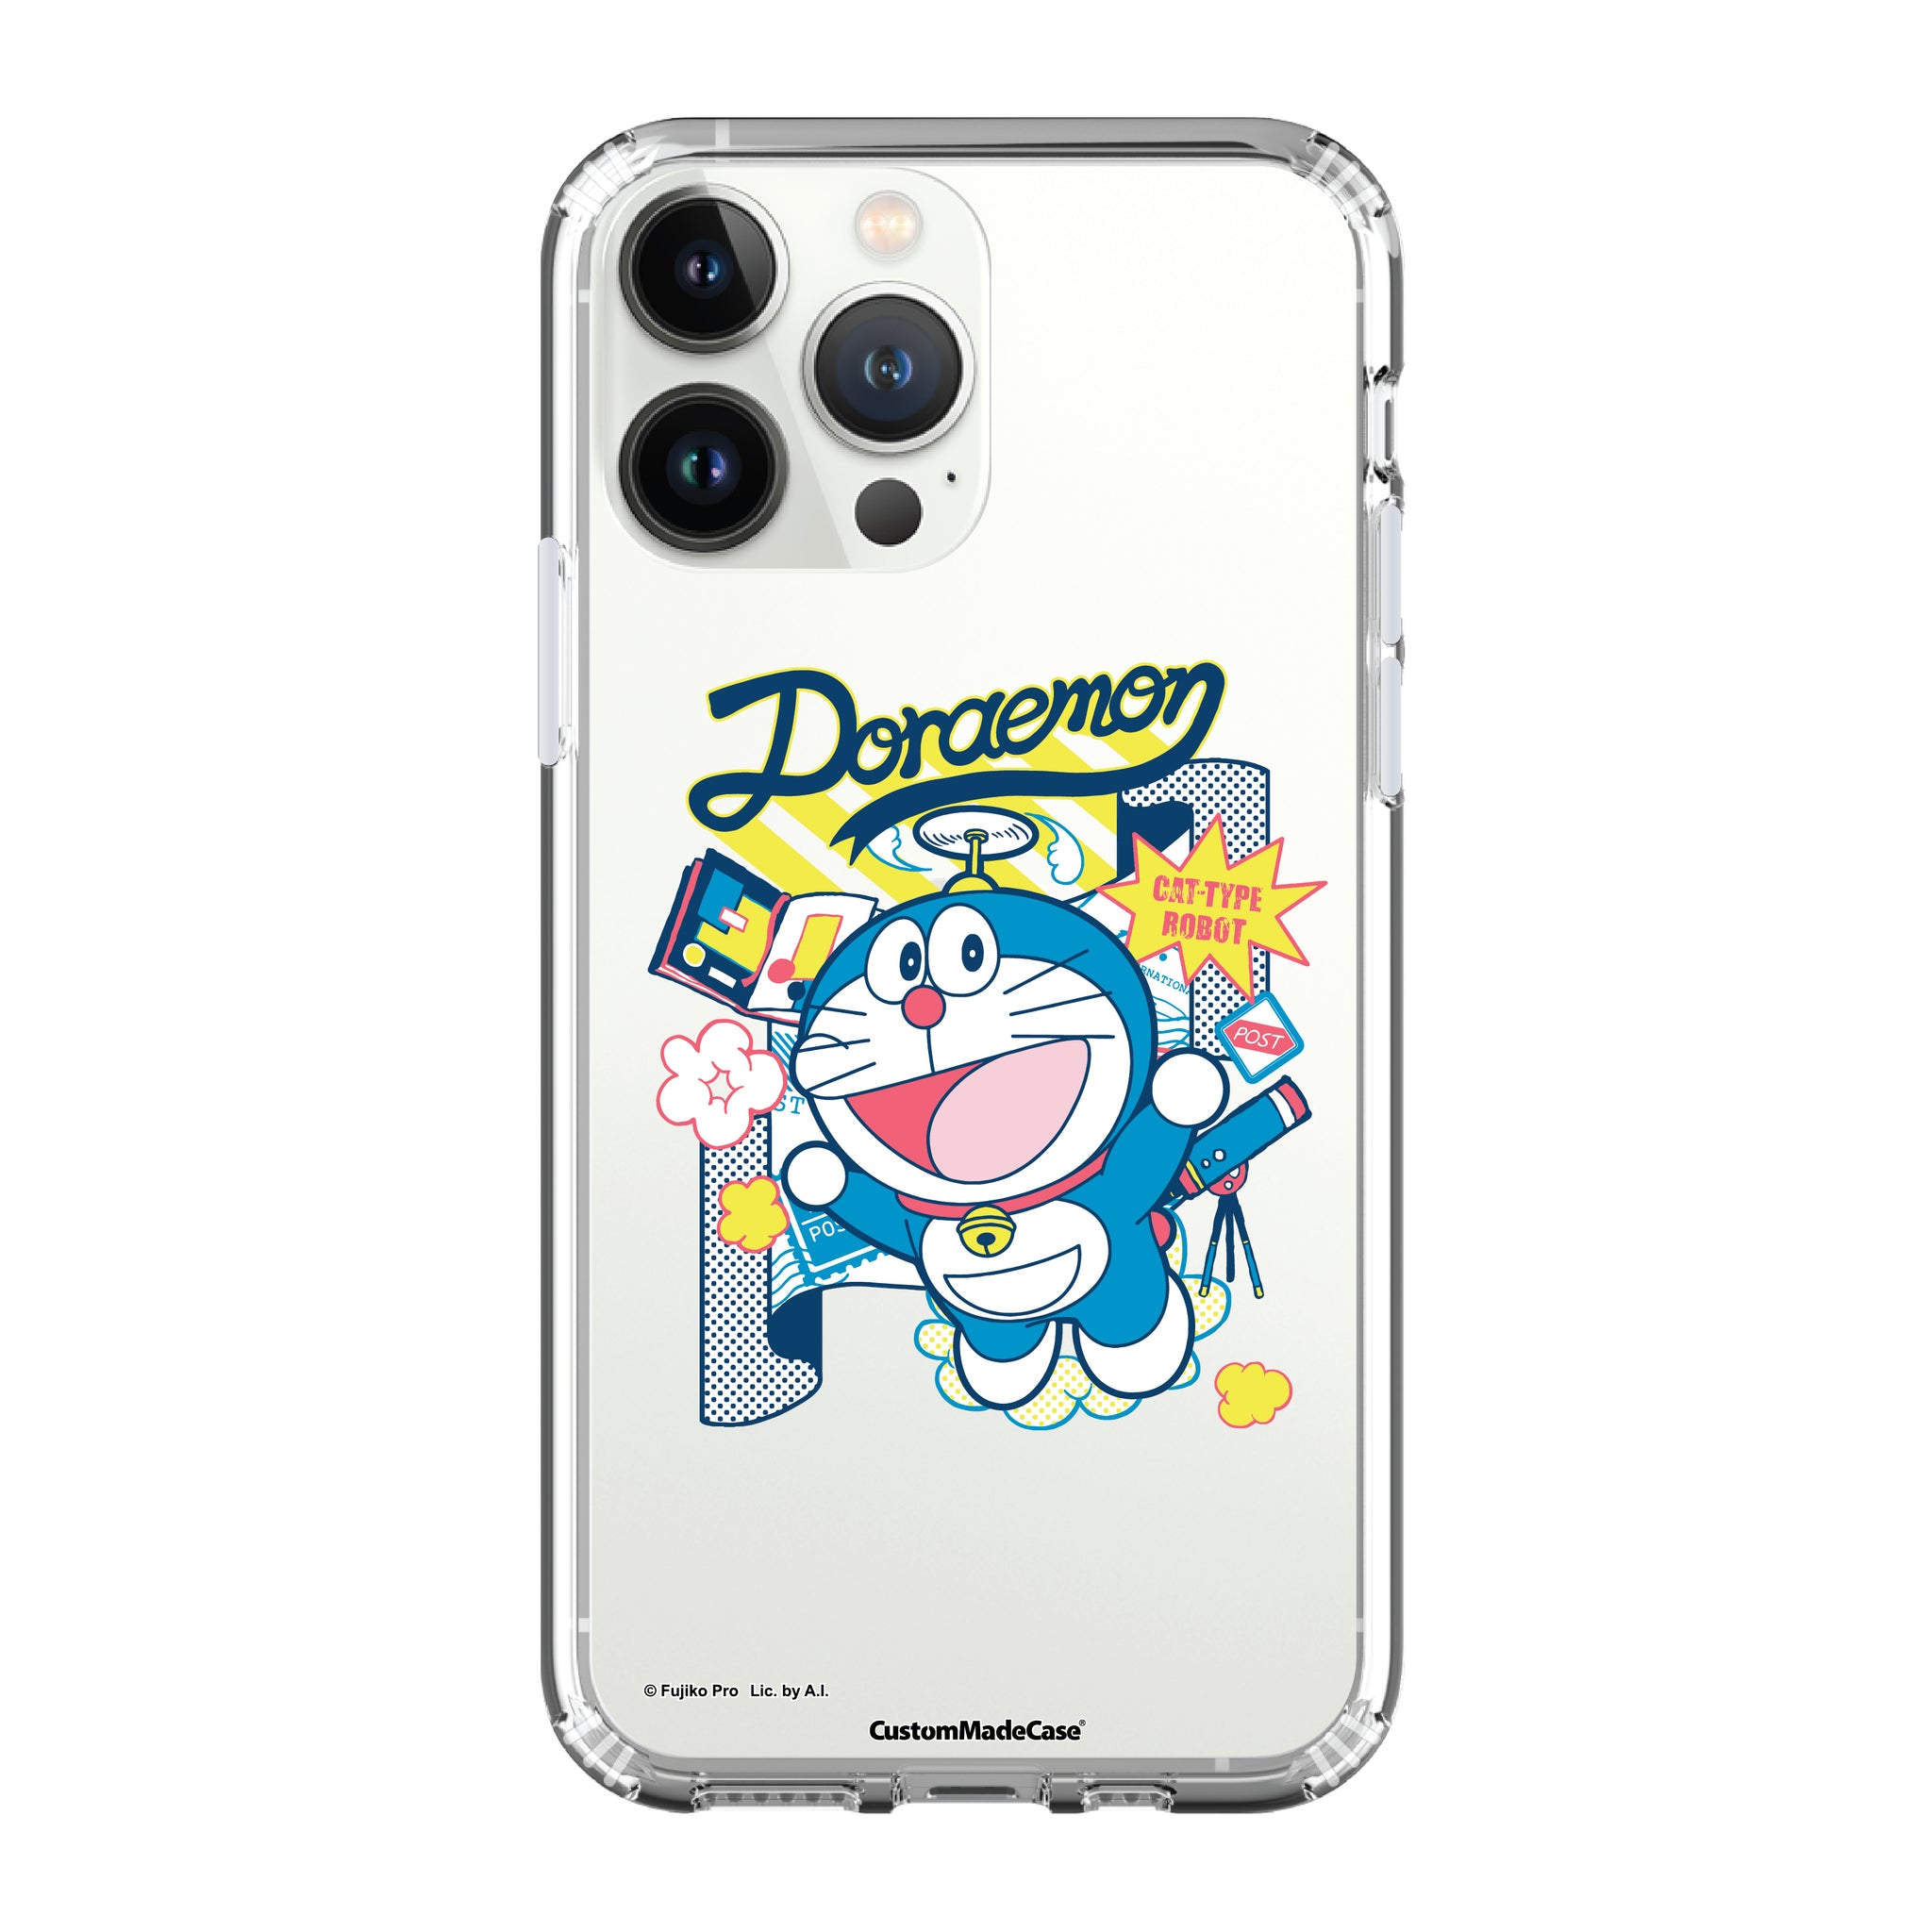 Doraemon Clear Case / iPhone Case / Android Case / Samsung Case 多啦A夢 正版授權 全包邊氣囊防撞手機殼  (DO115)